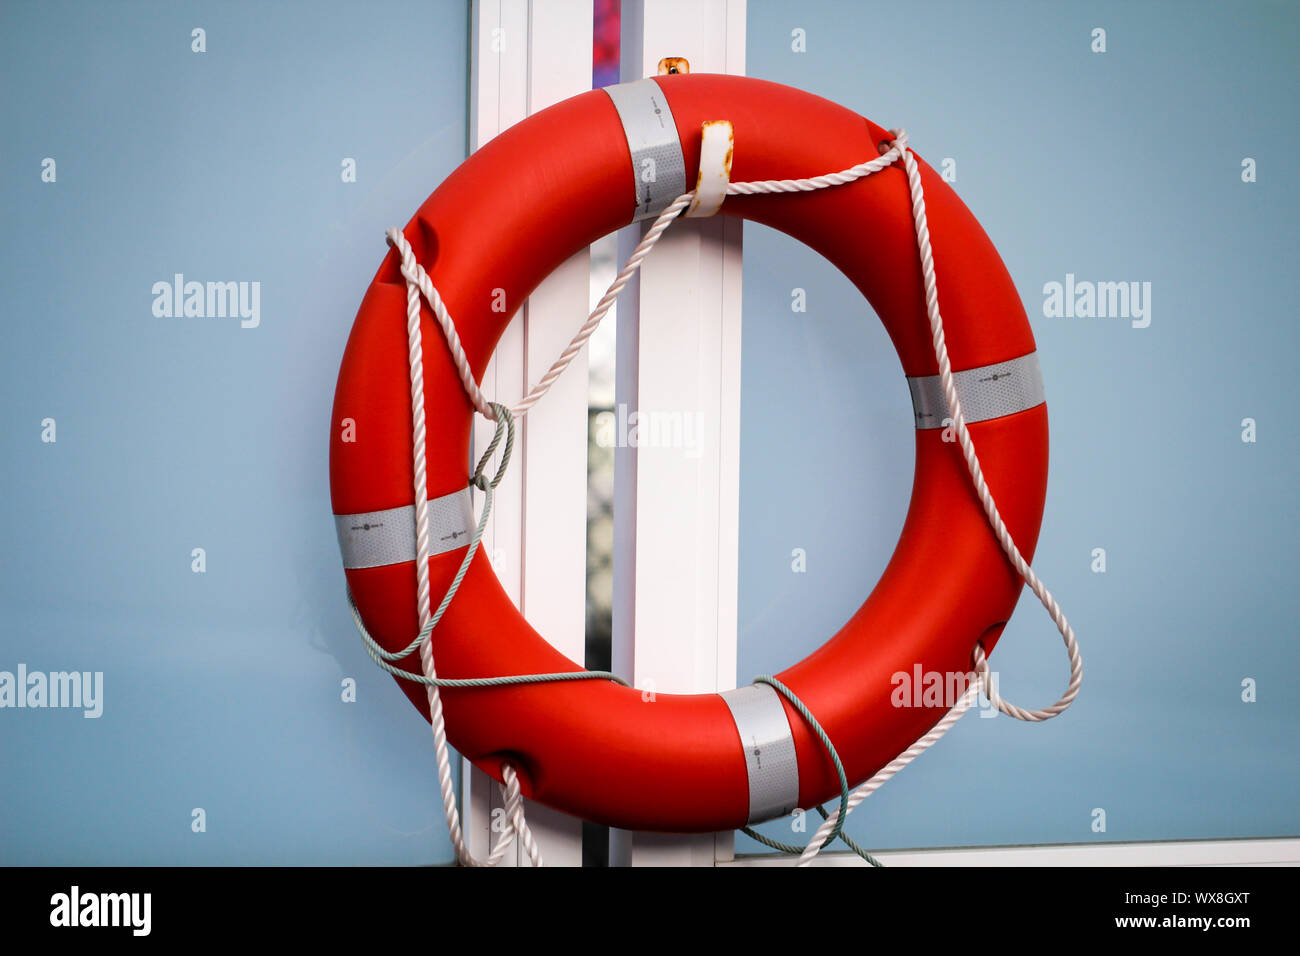 Safety equipment, Life buoy or rescue buoy Stock Photo